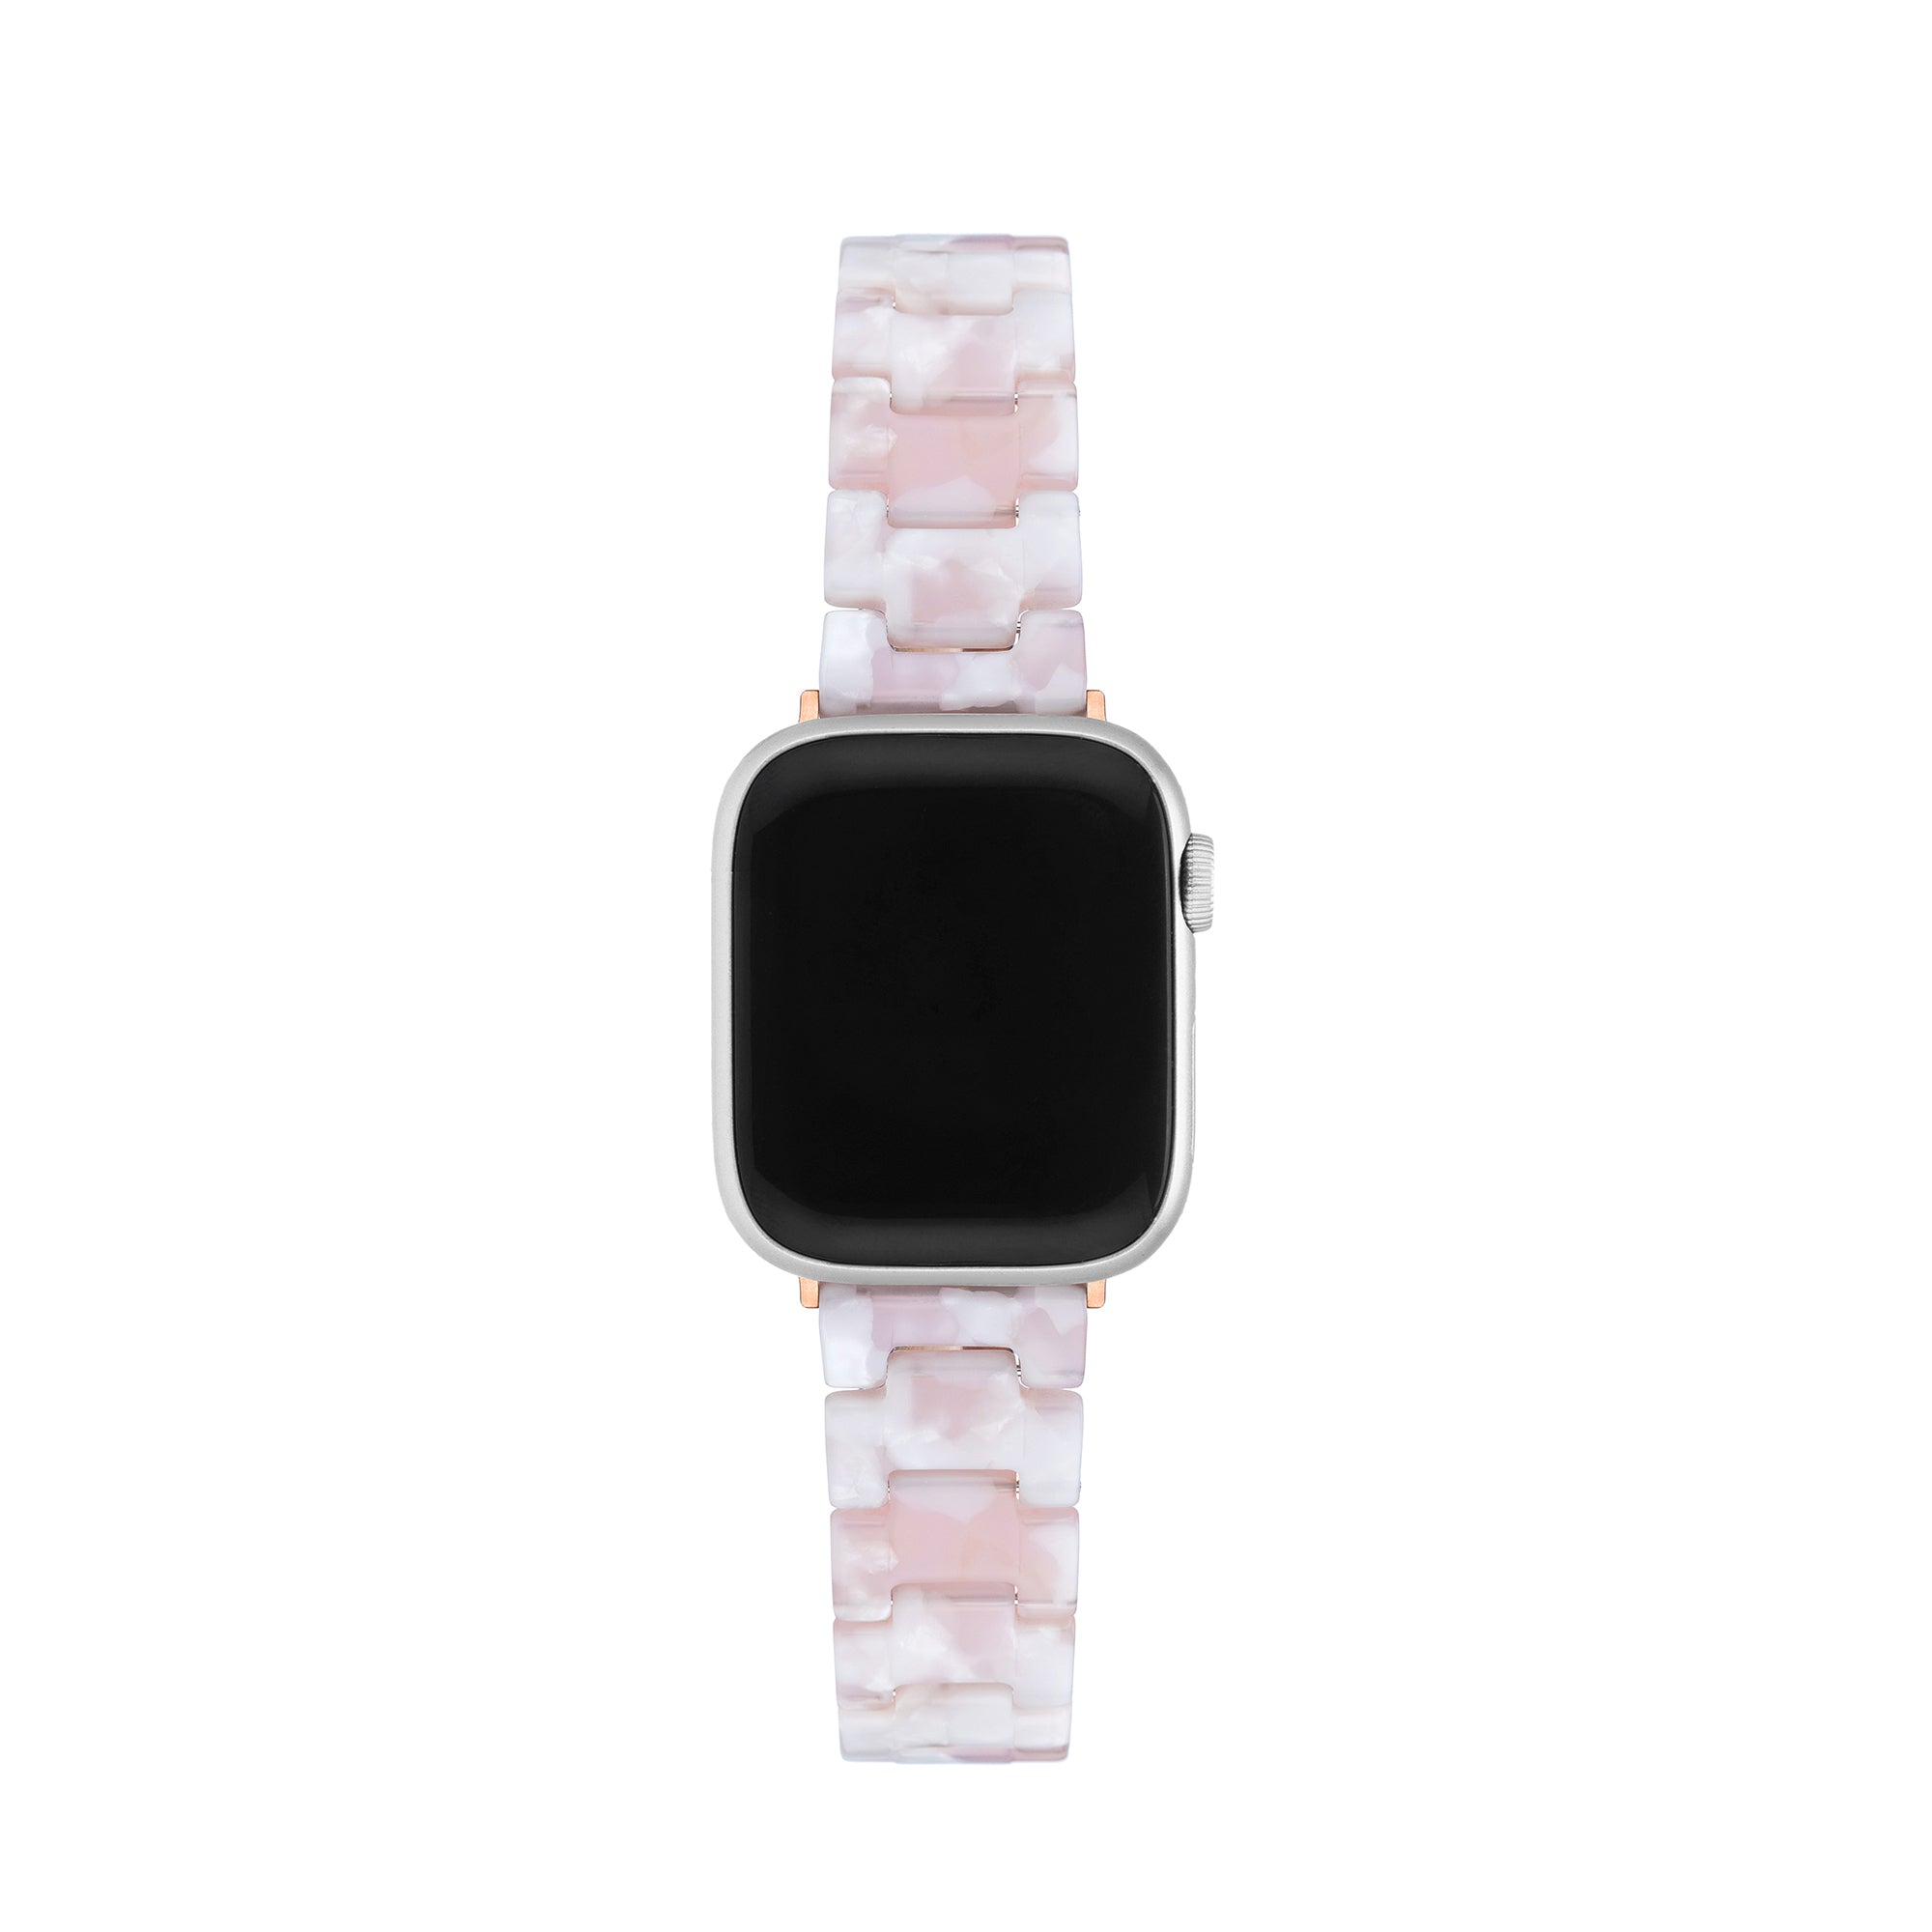 Resin Porcelain Apple Watch Band